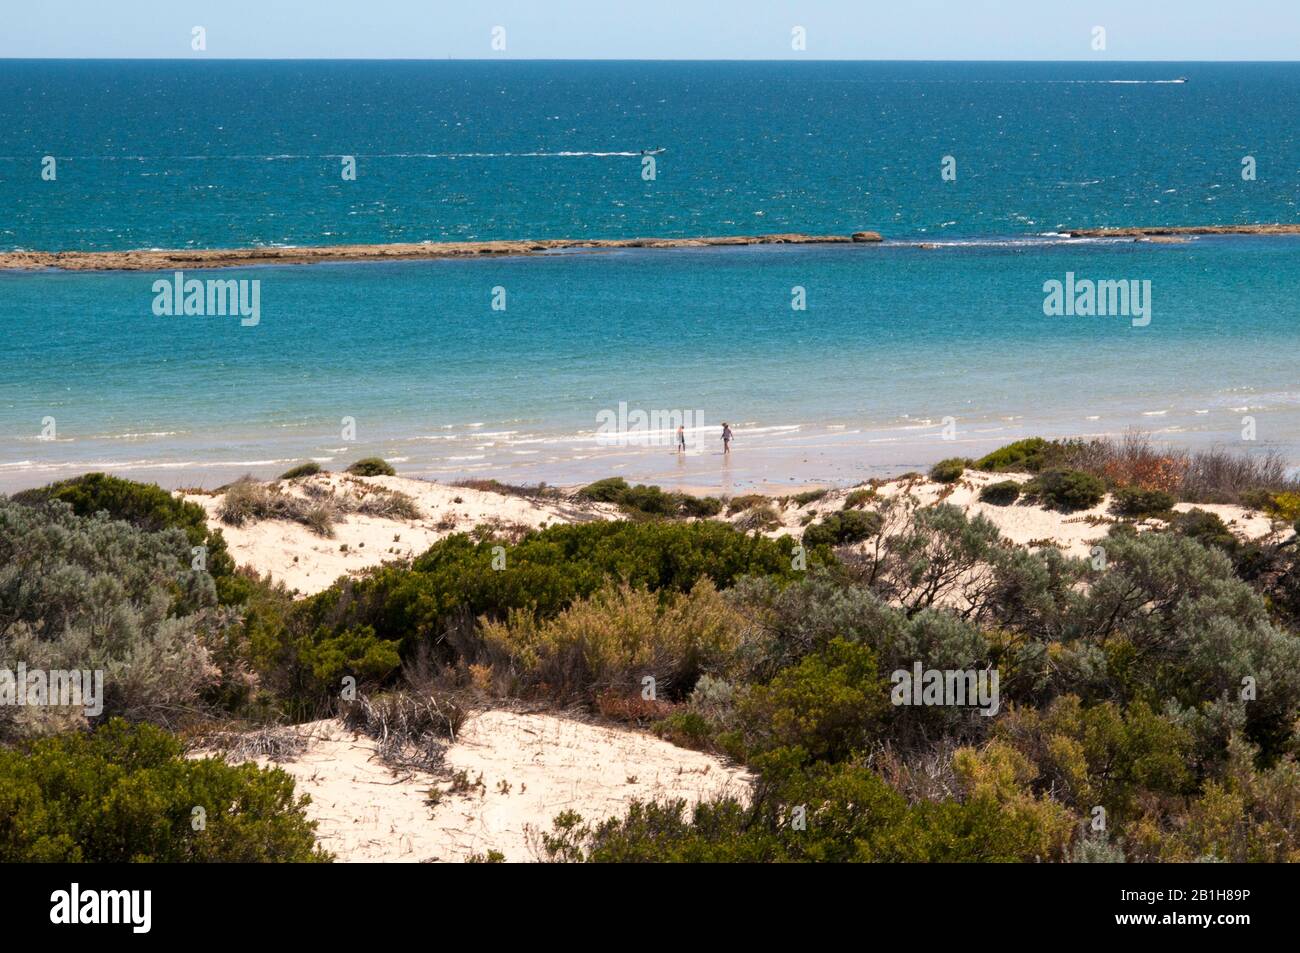 Beach showing the distinctive rocky reef at Port Noarlunga, South Australia Stock Photo